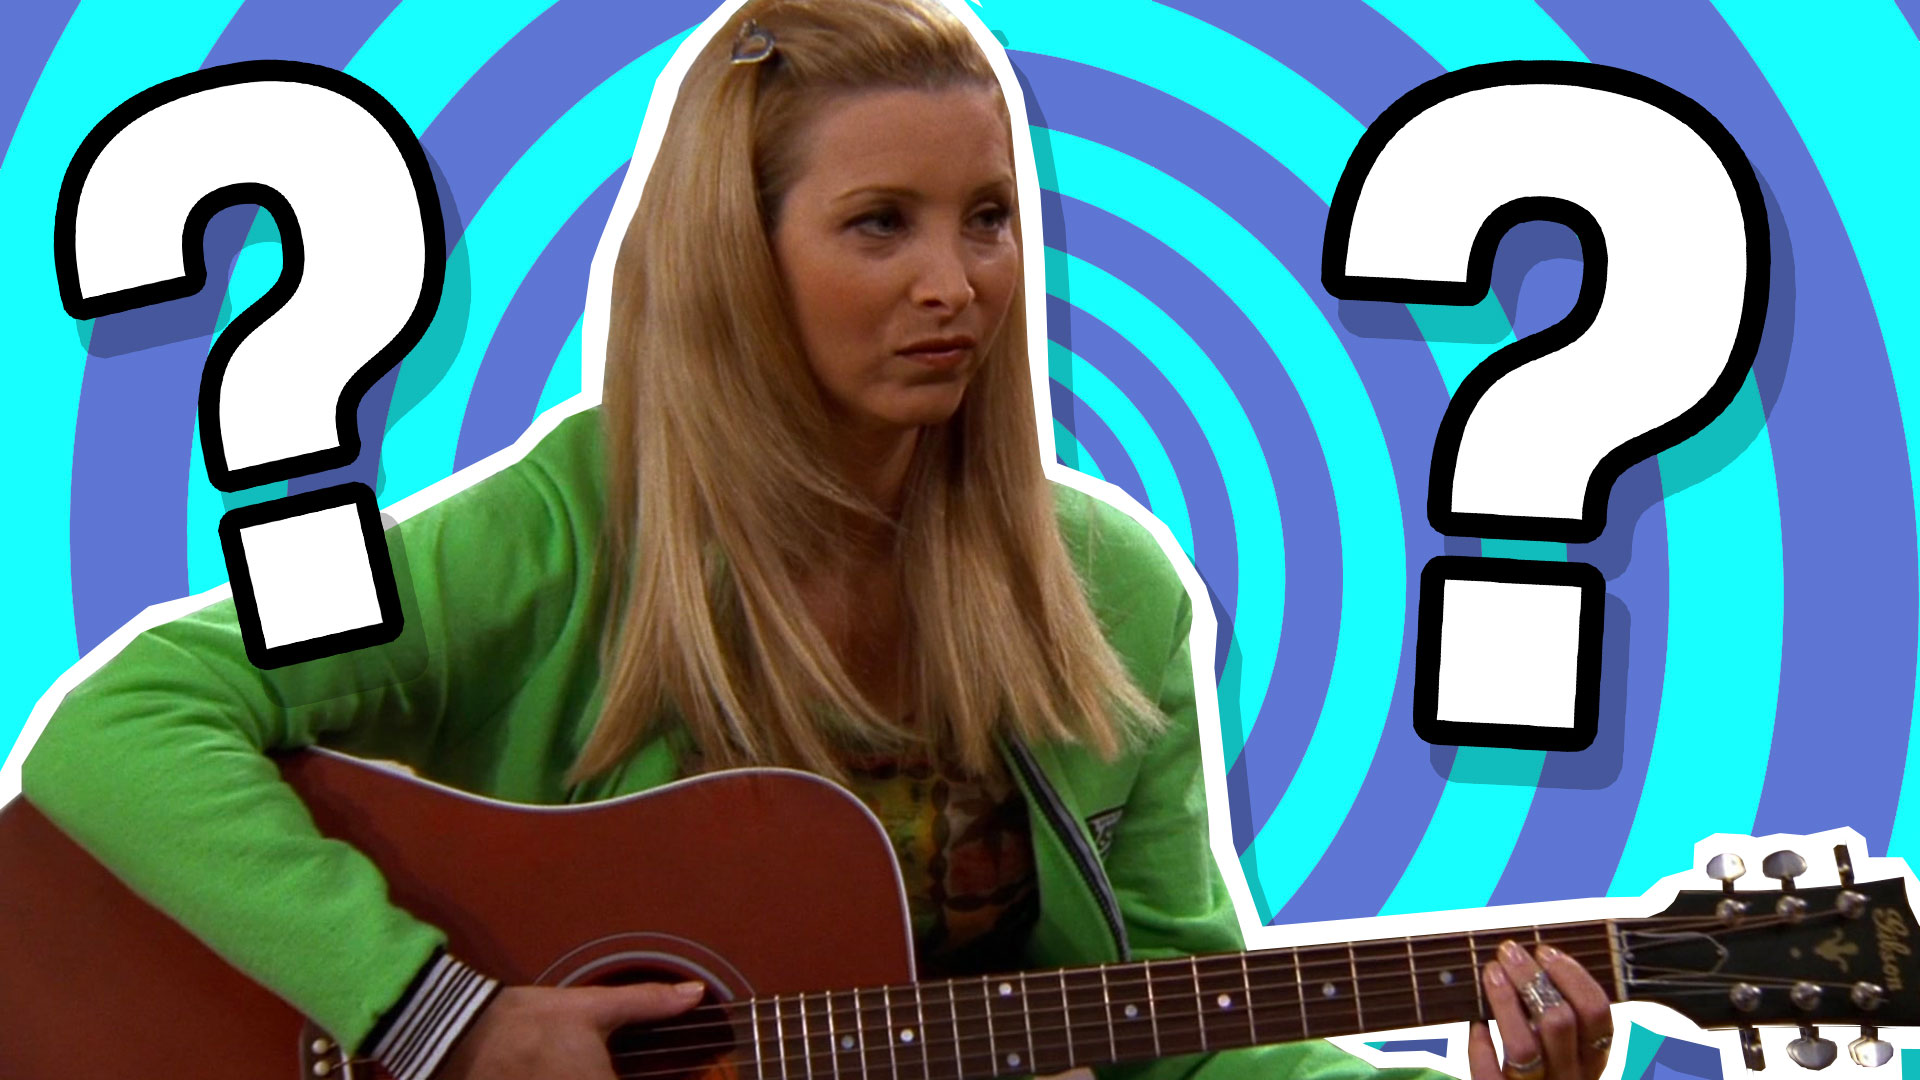 What percentage Phoebe Buffay are You?